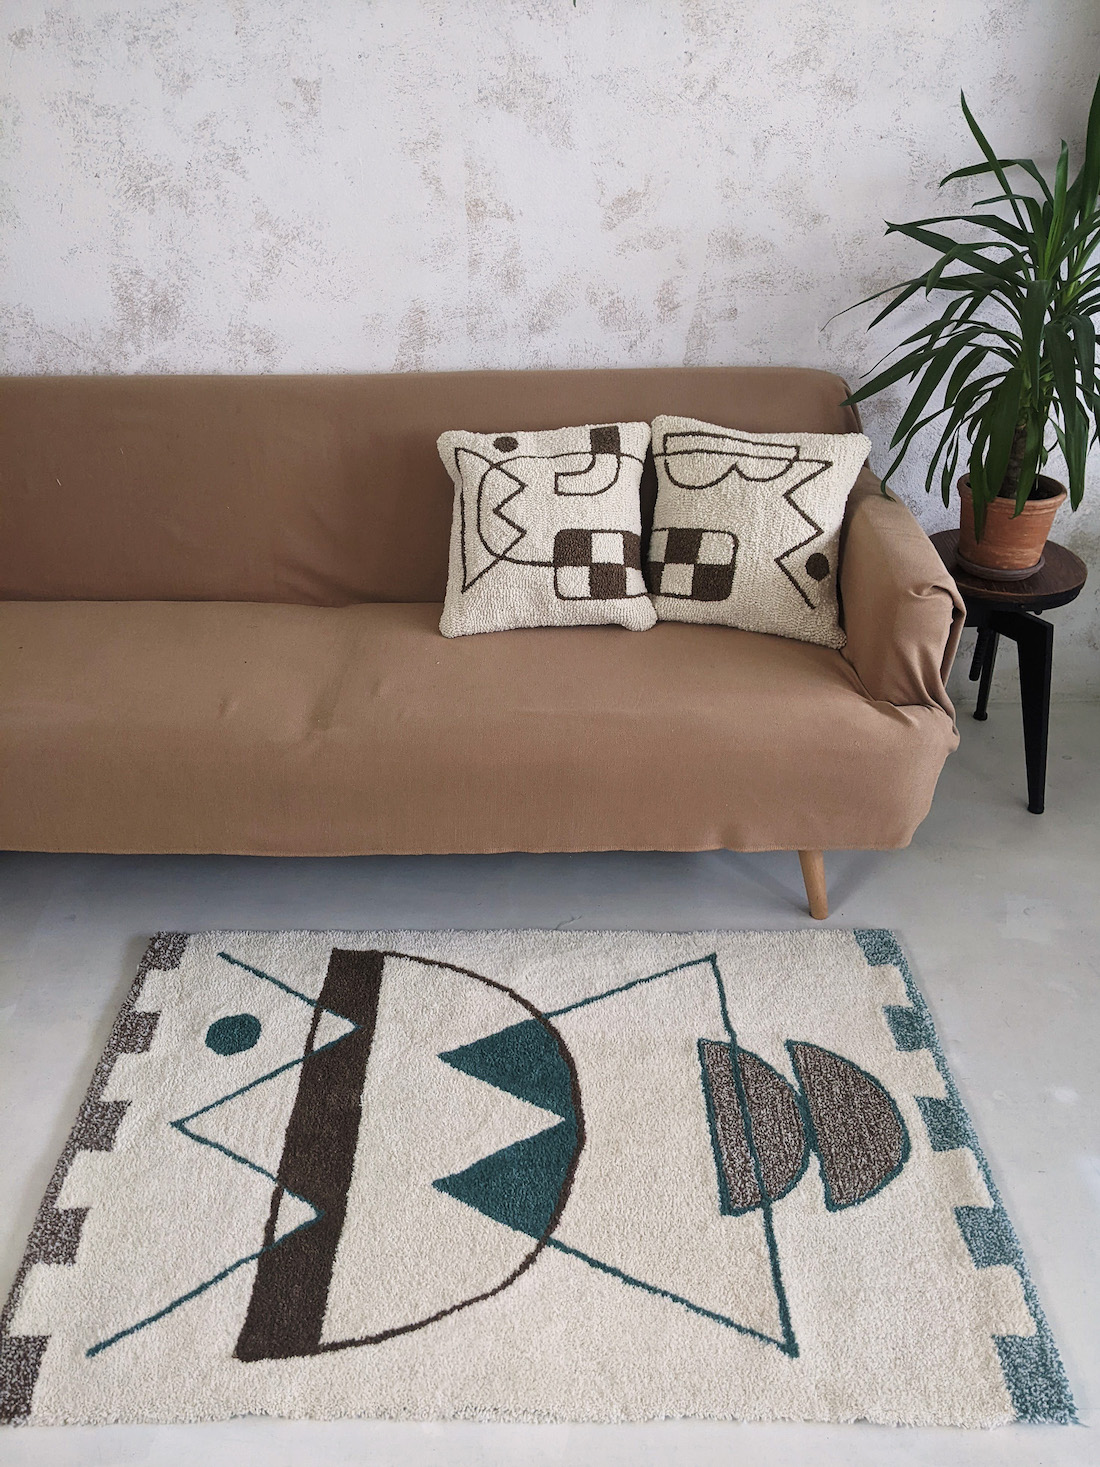 Rug and cushions by ito